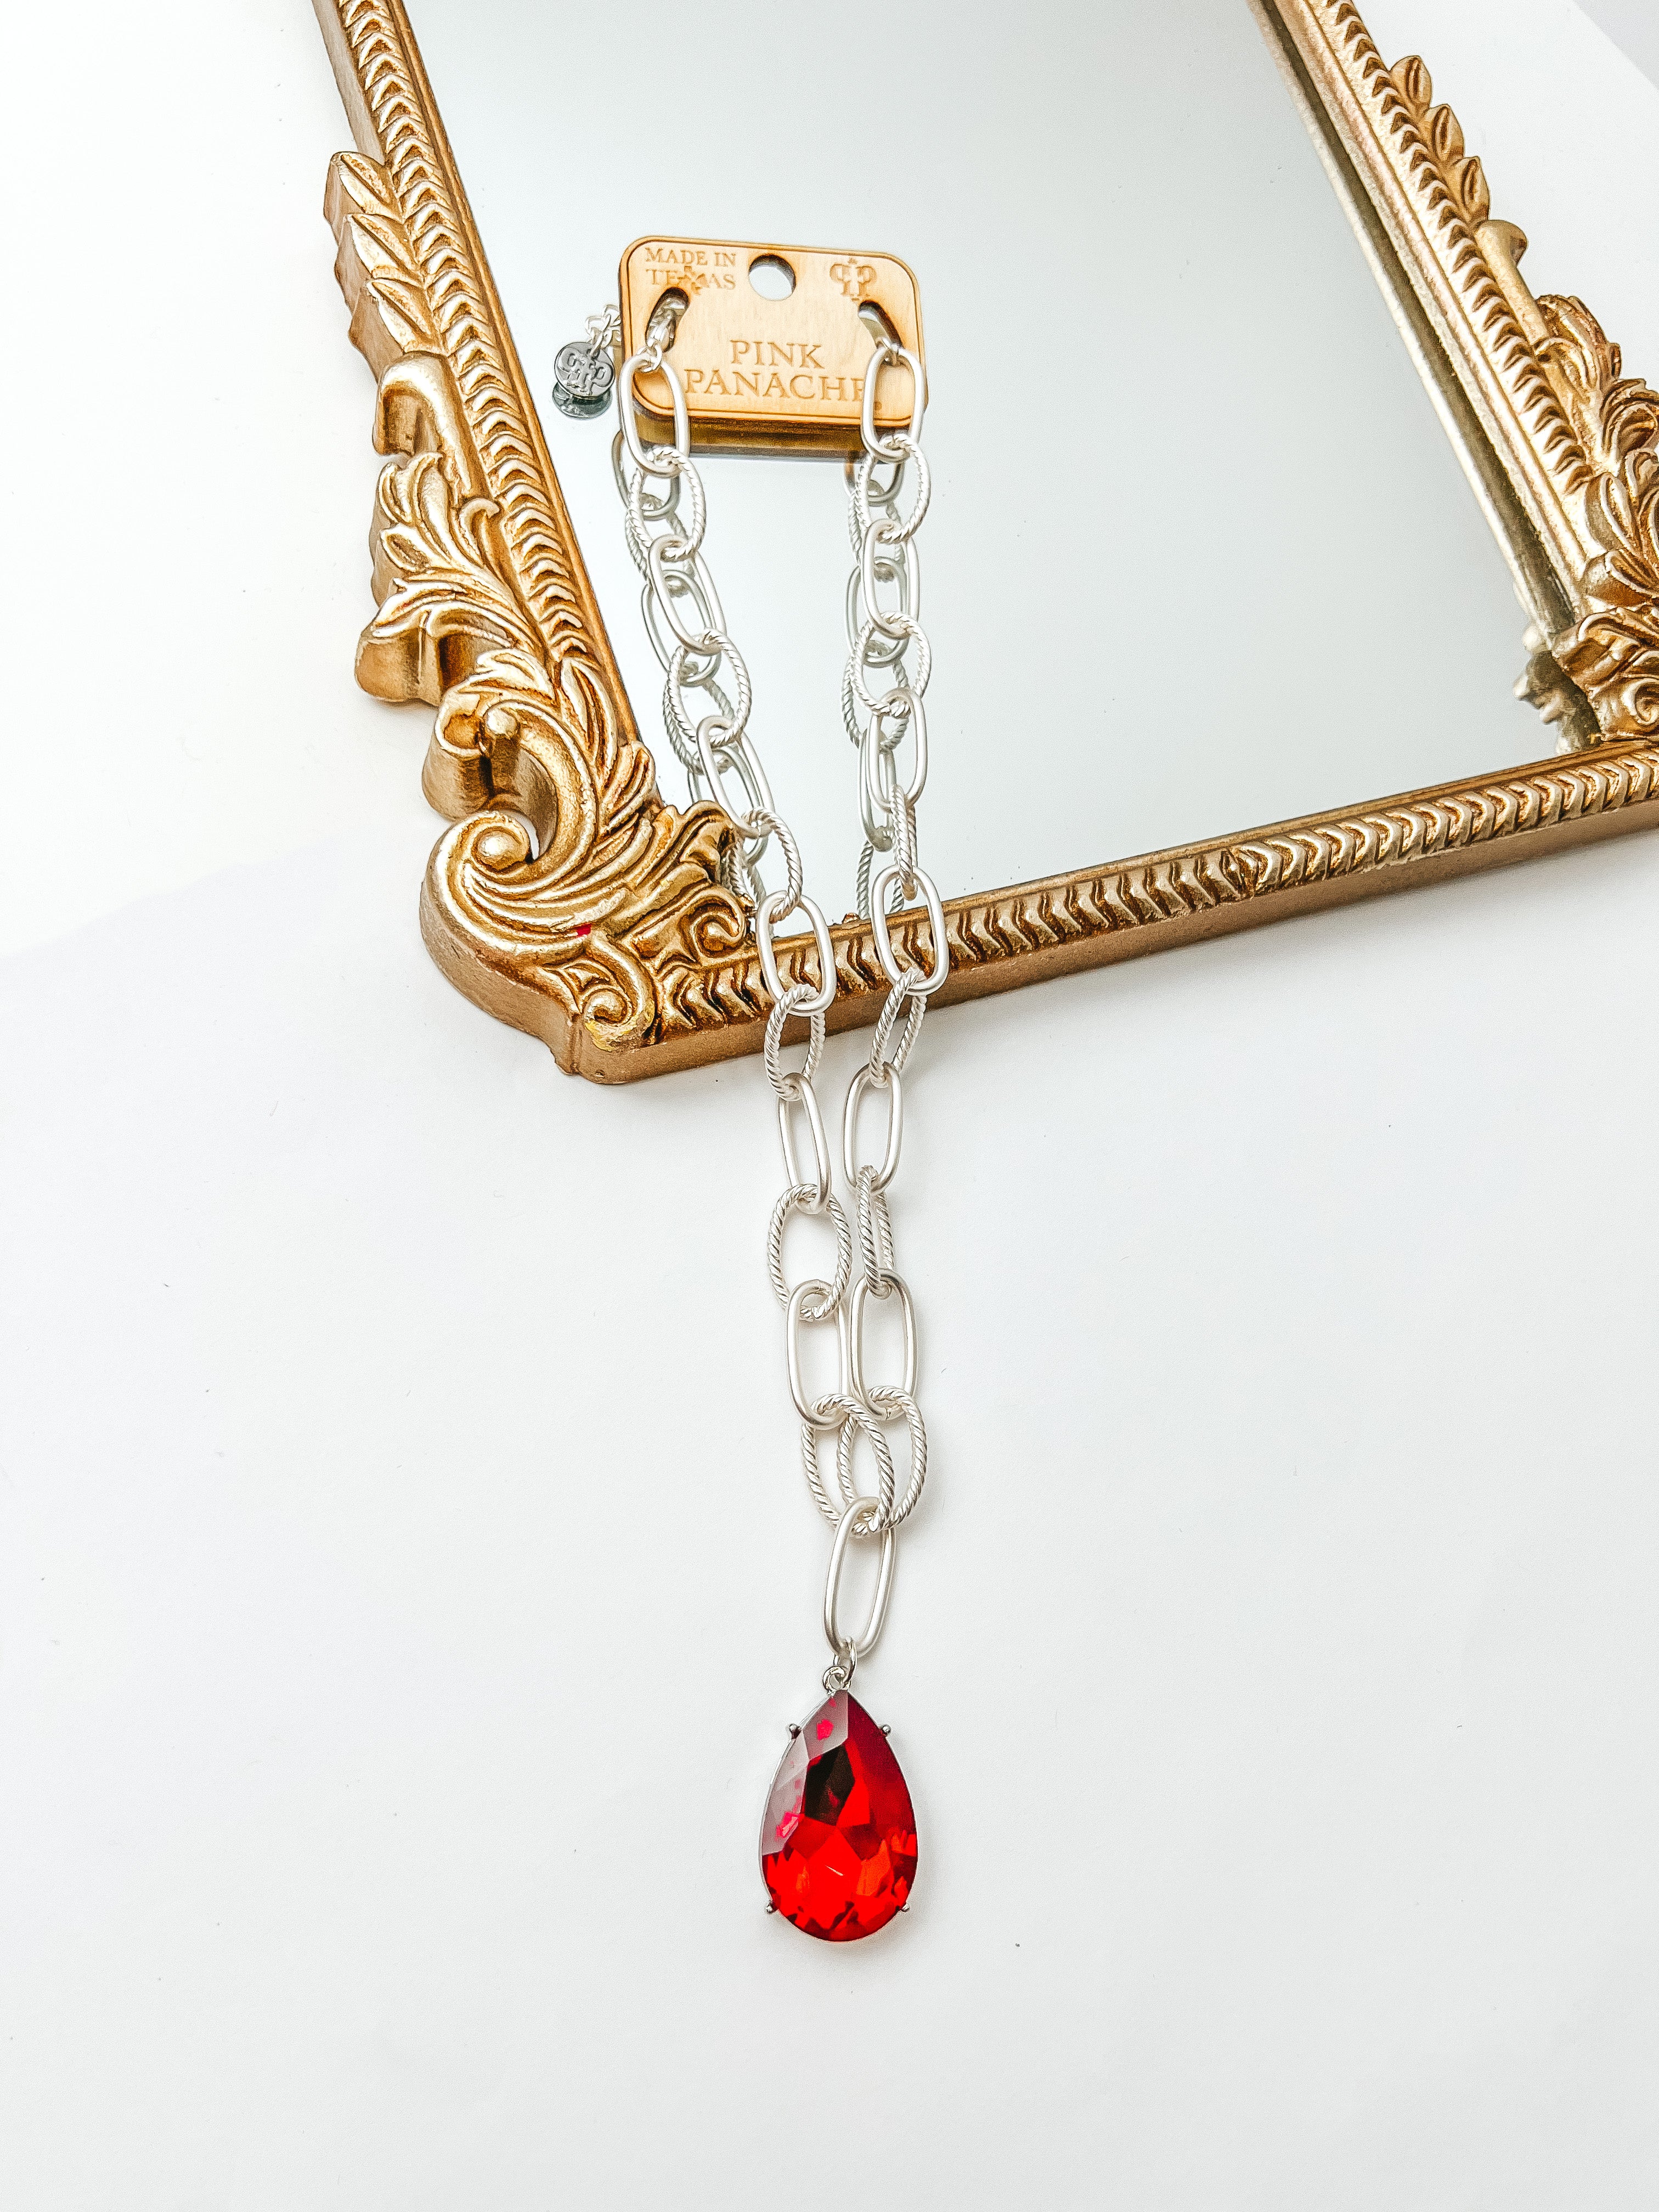 Pink Panache | Silver Tone Large Link Chain Necklace with Large Red Crystal Teardrop - Giddy Up Glamour Boutique